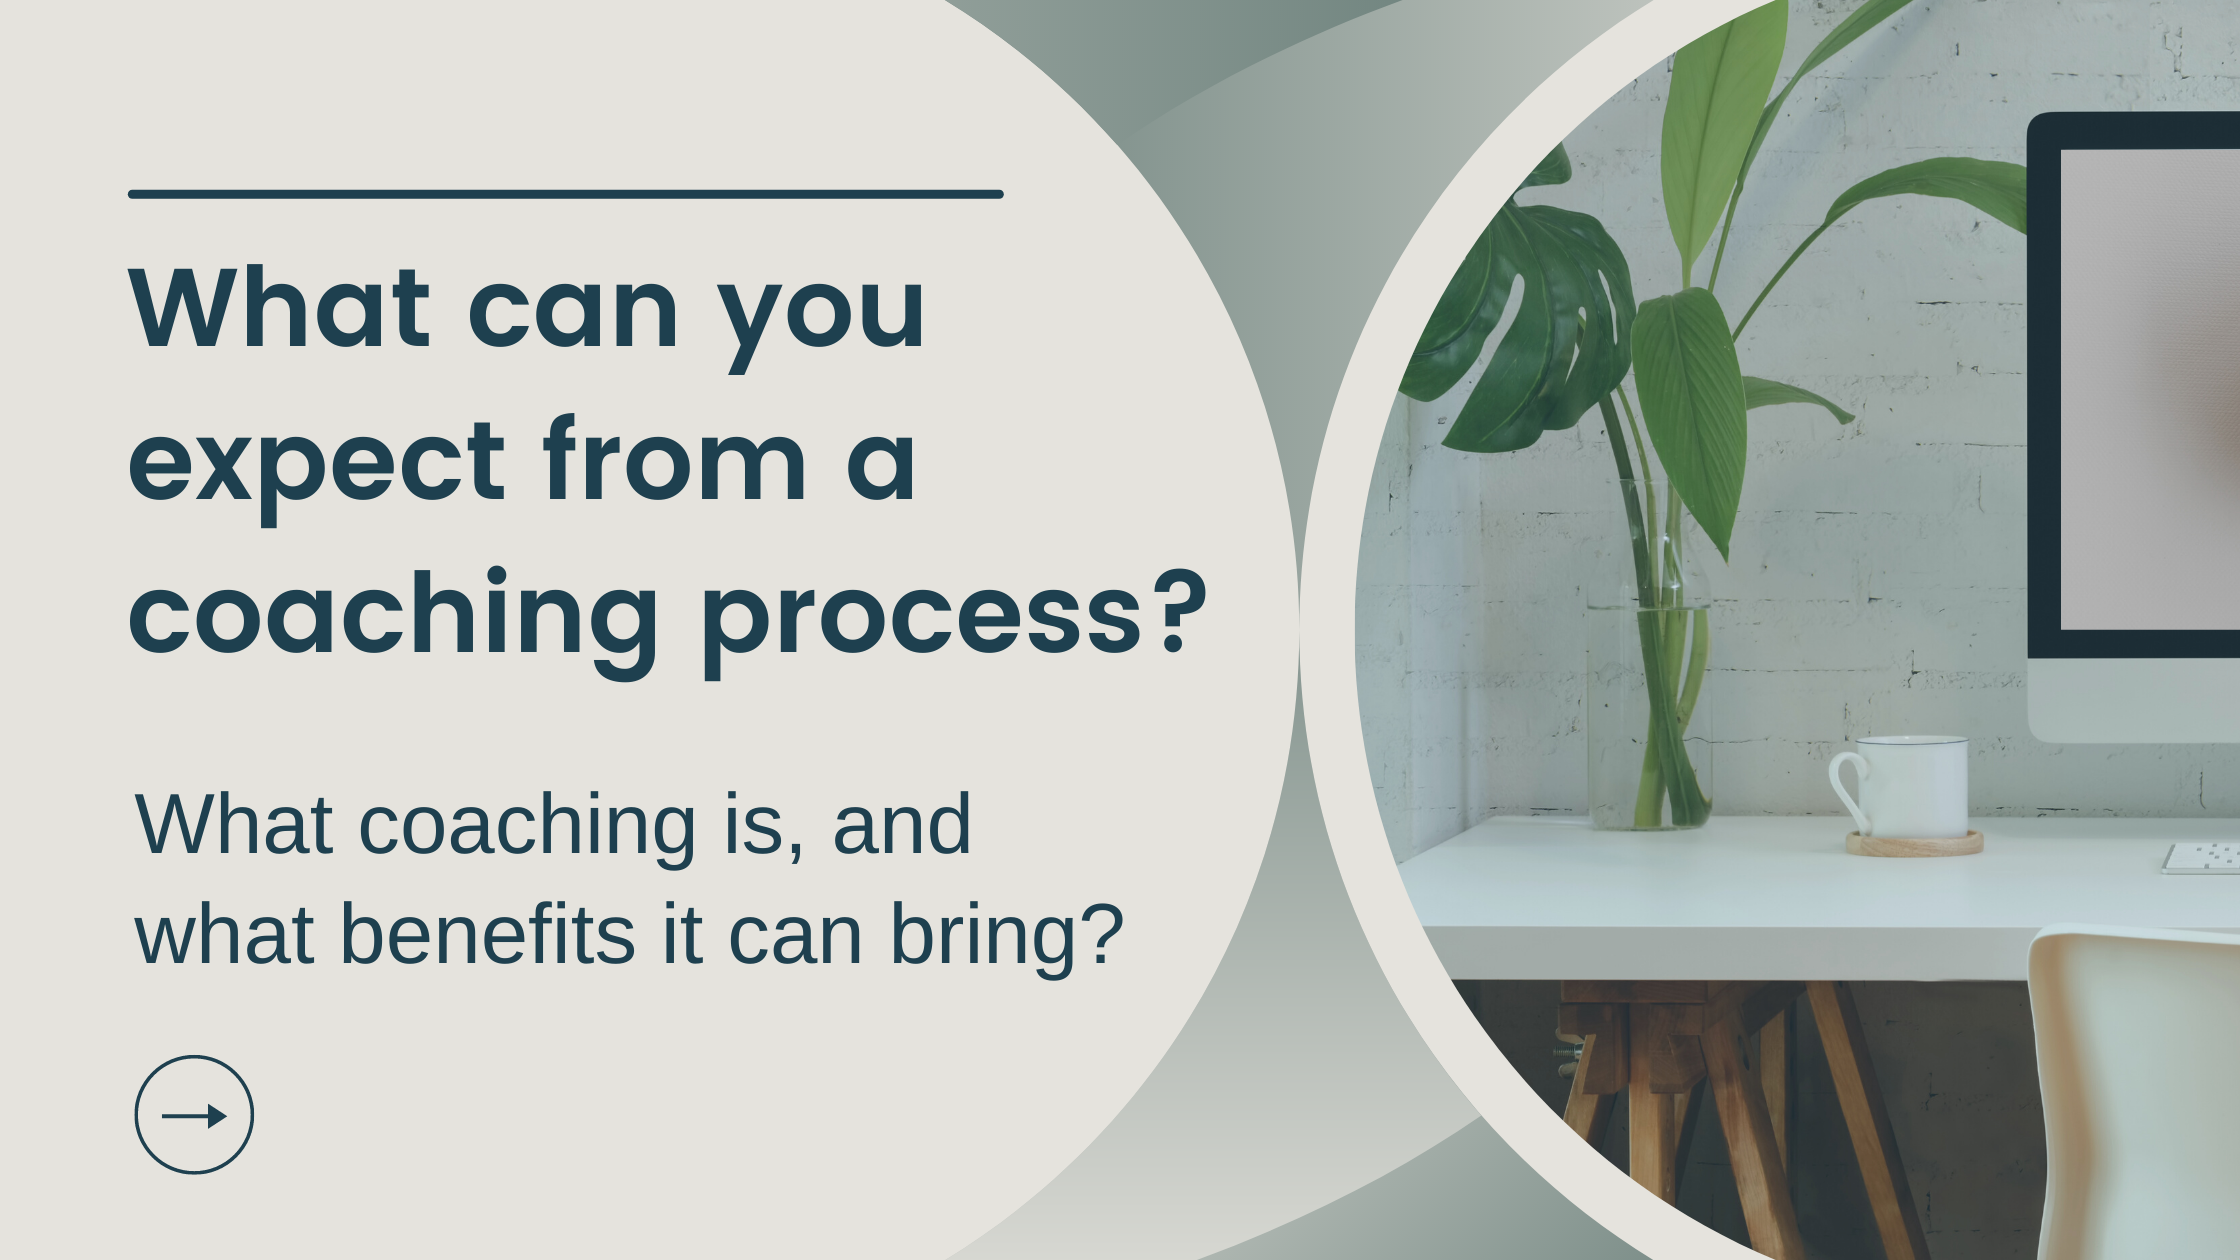 What can you expect from a coaching process?